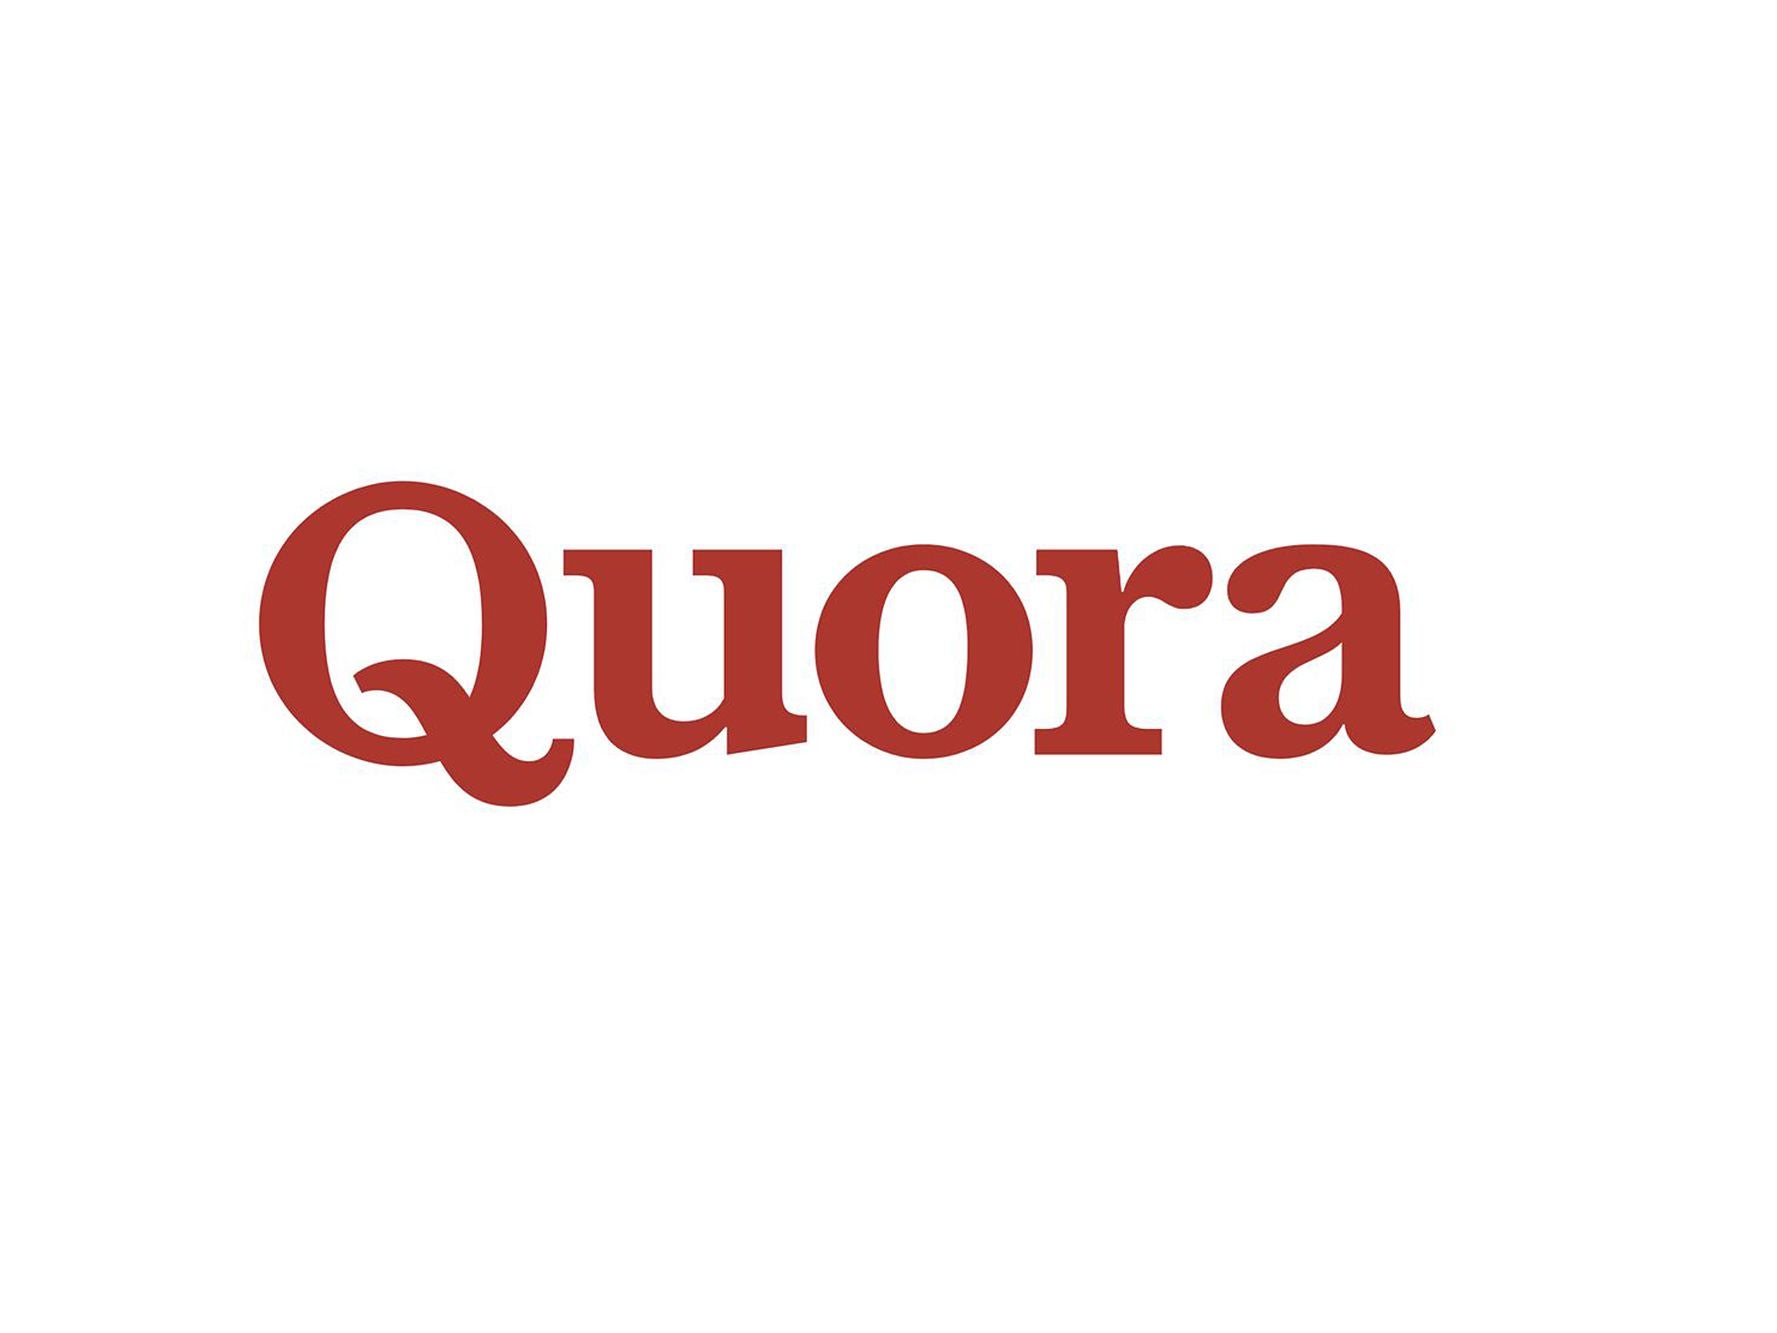 <strong>can i sort quora questions by followers?</strong>